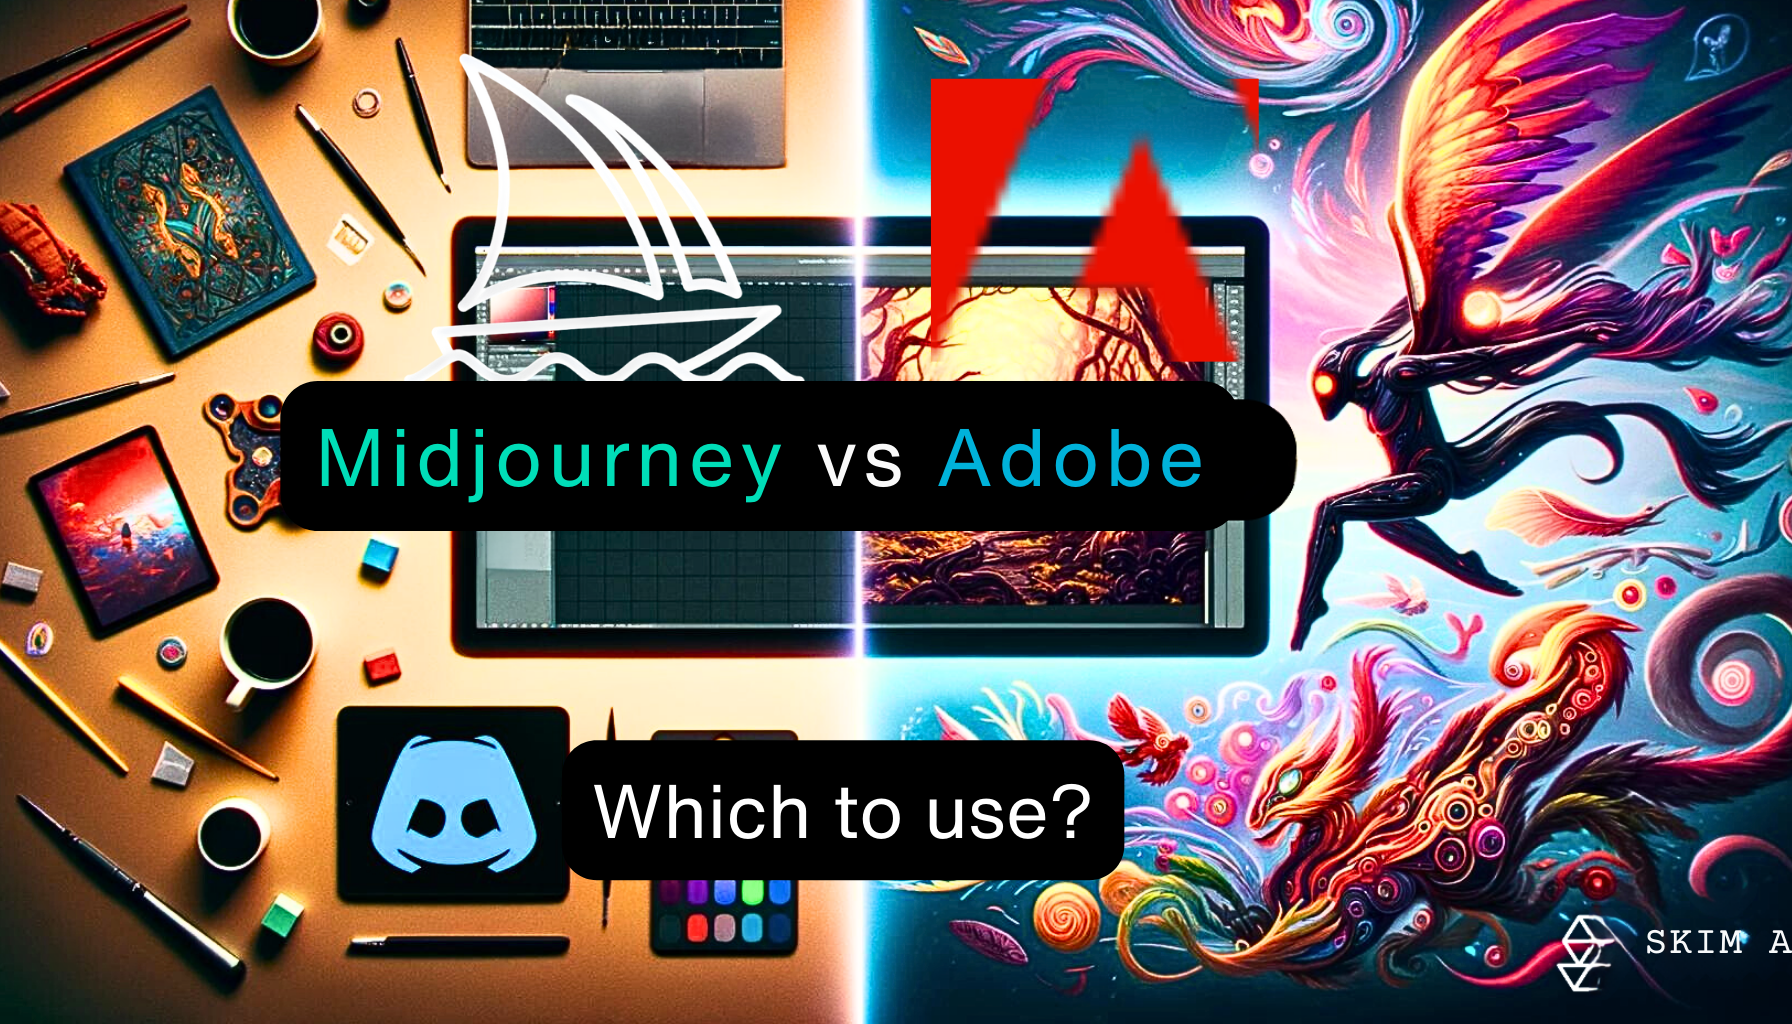 Adobe Firefly vs. Midjourney: Which is Better?